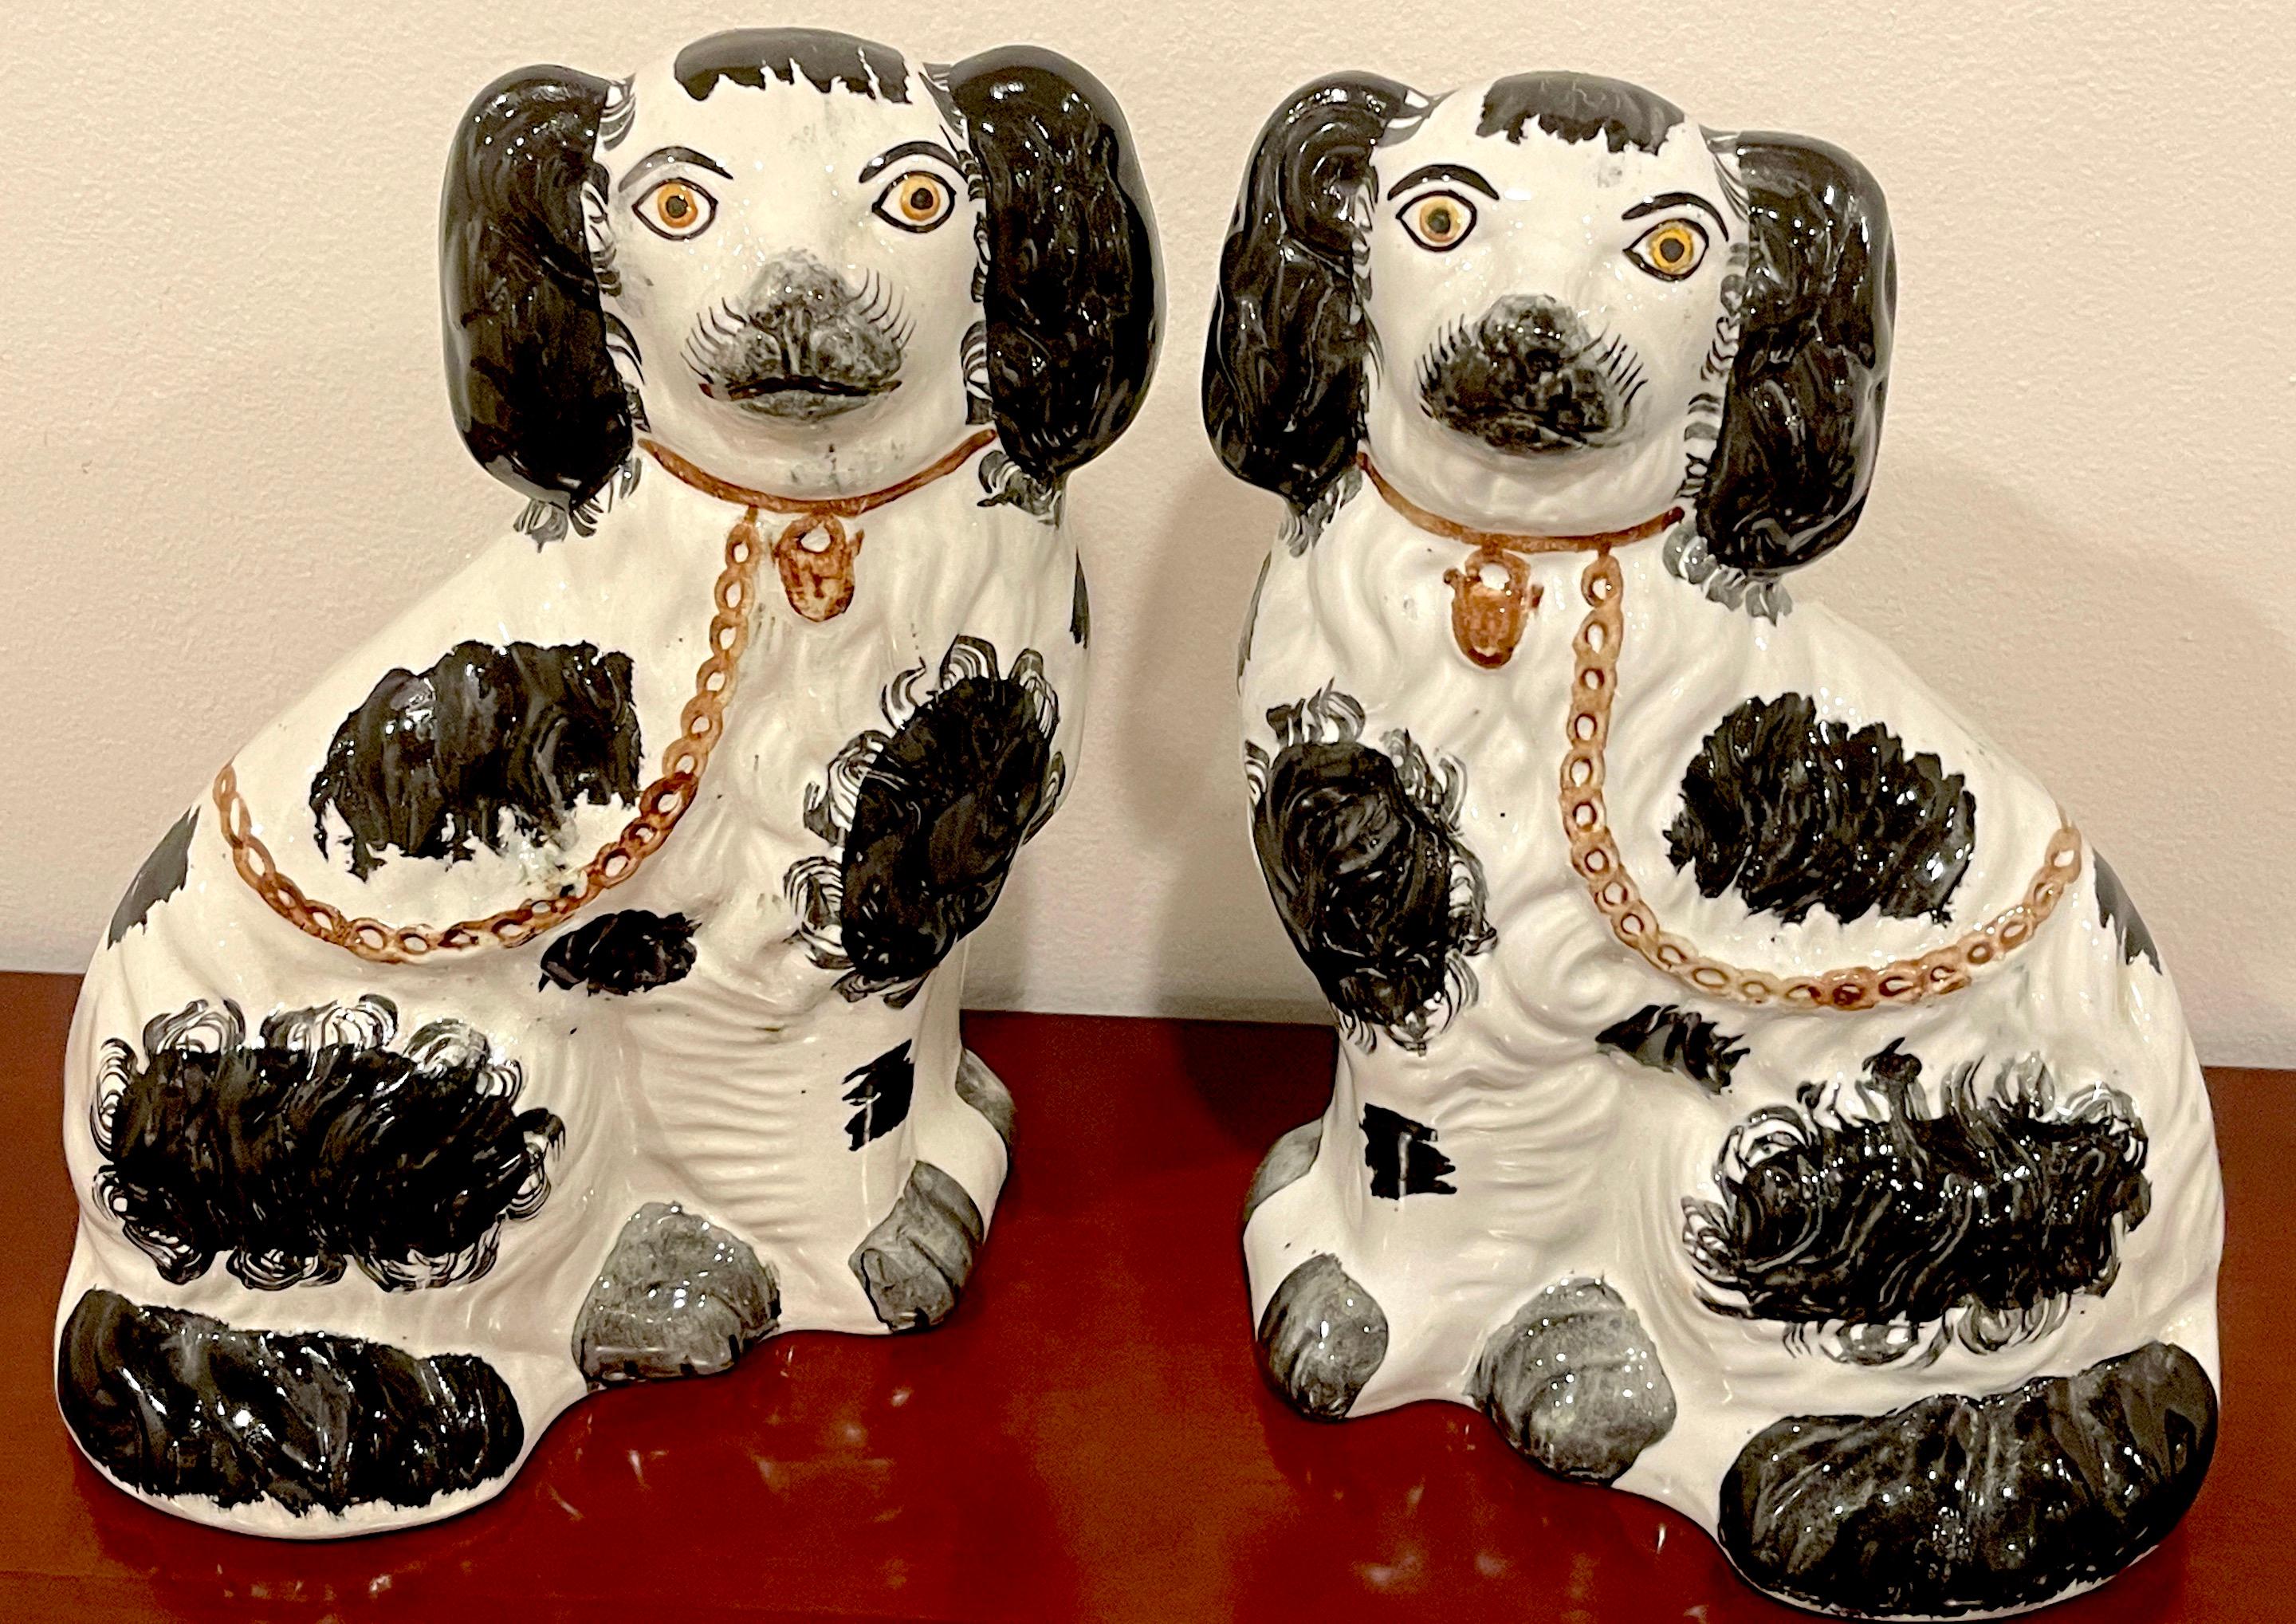 Pair of 19th C Staffordshire black & white spaniels, A nice variation of the more common Staffordshire dogs, This pair painted with expressive yellow eyes, with chain and lock collars, and black 'sponge' decoration. Unmarked, of the the period.